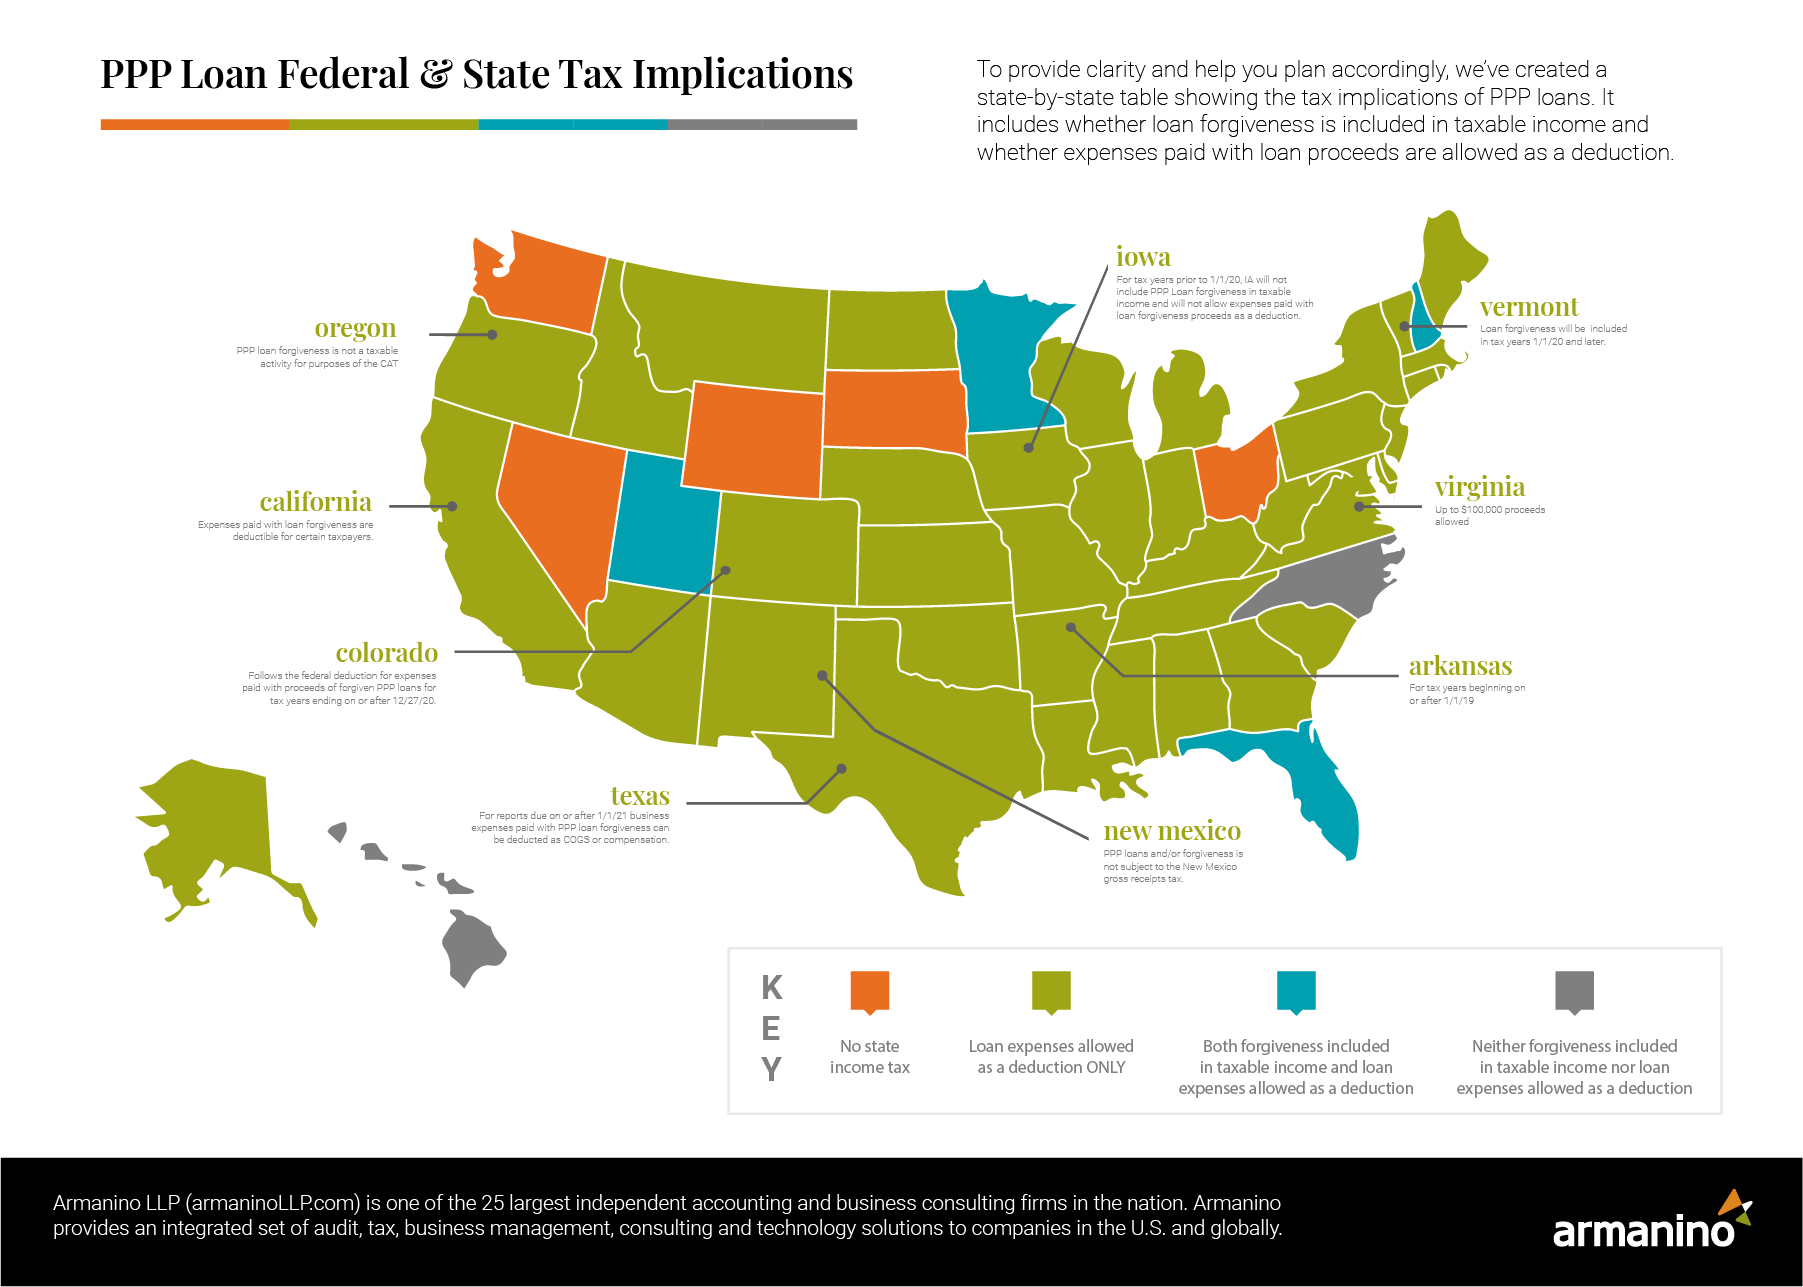 PPP Loan Tax Implications by State Infographic